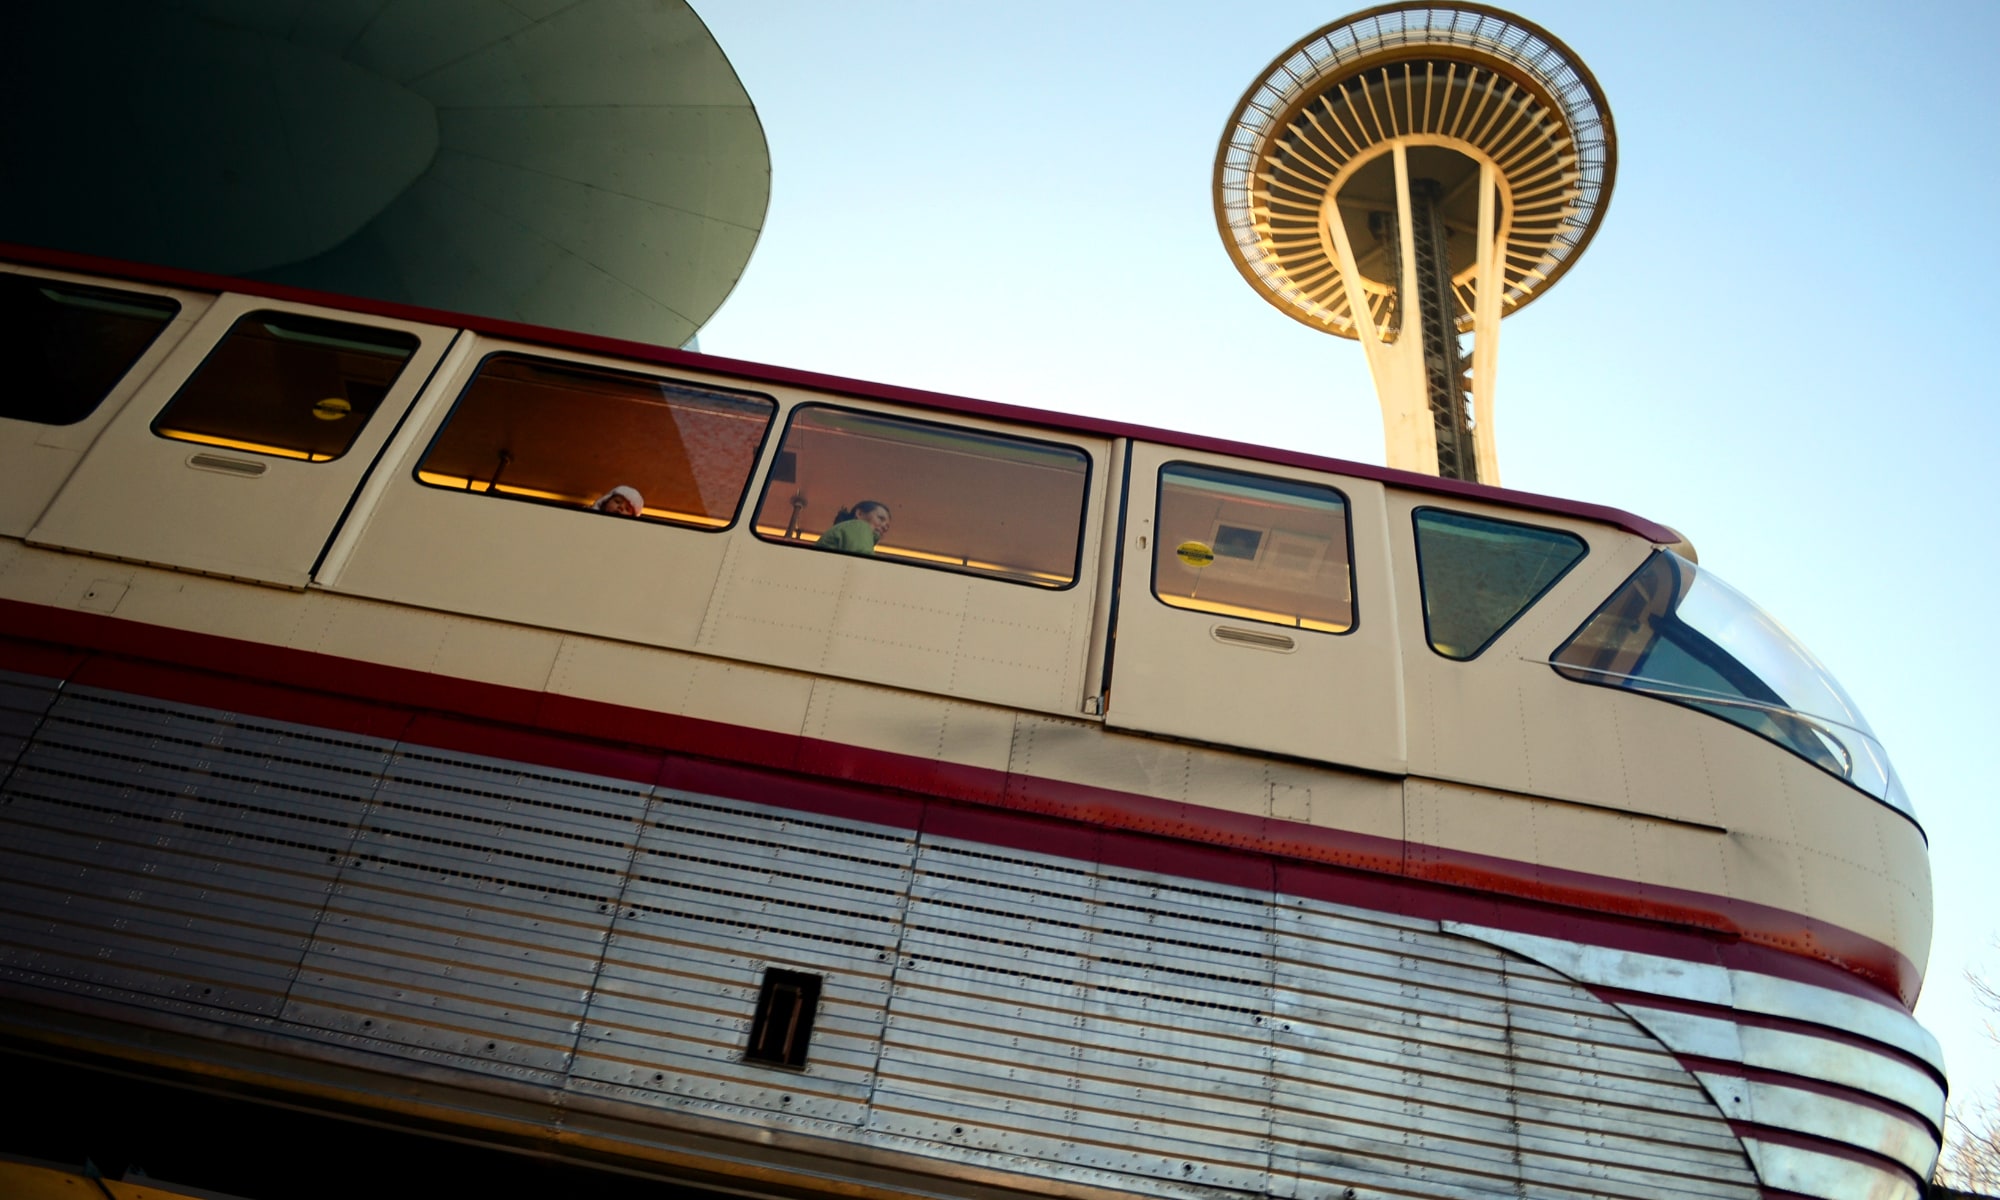 Our 9 Favorite Tours to Take While Visiting Seattle